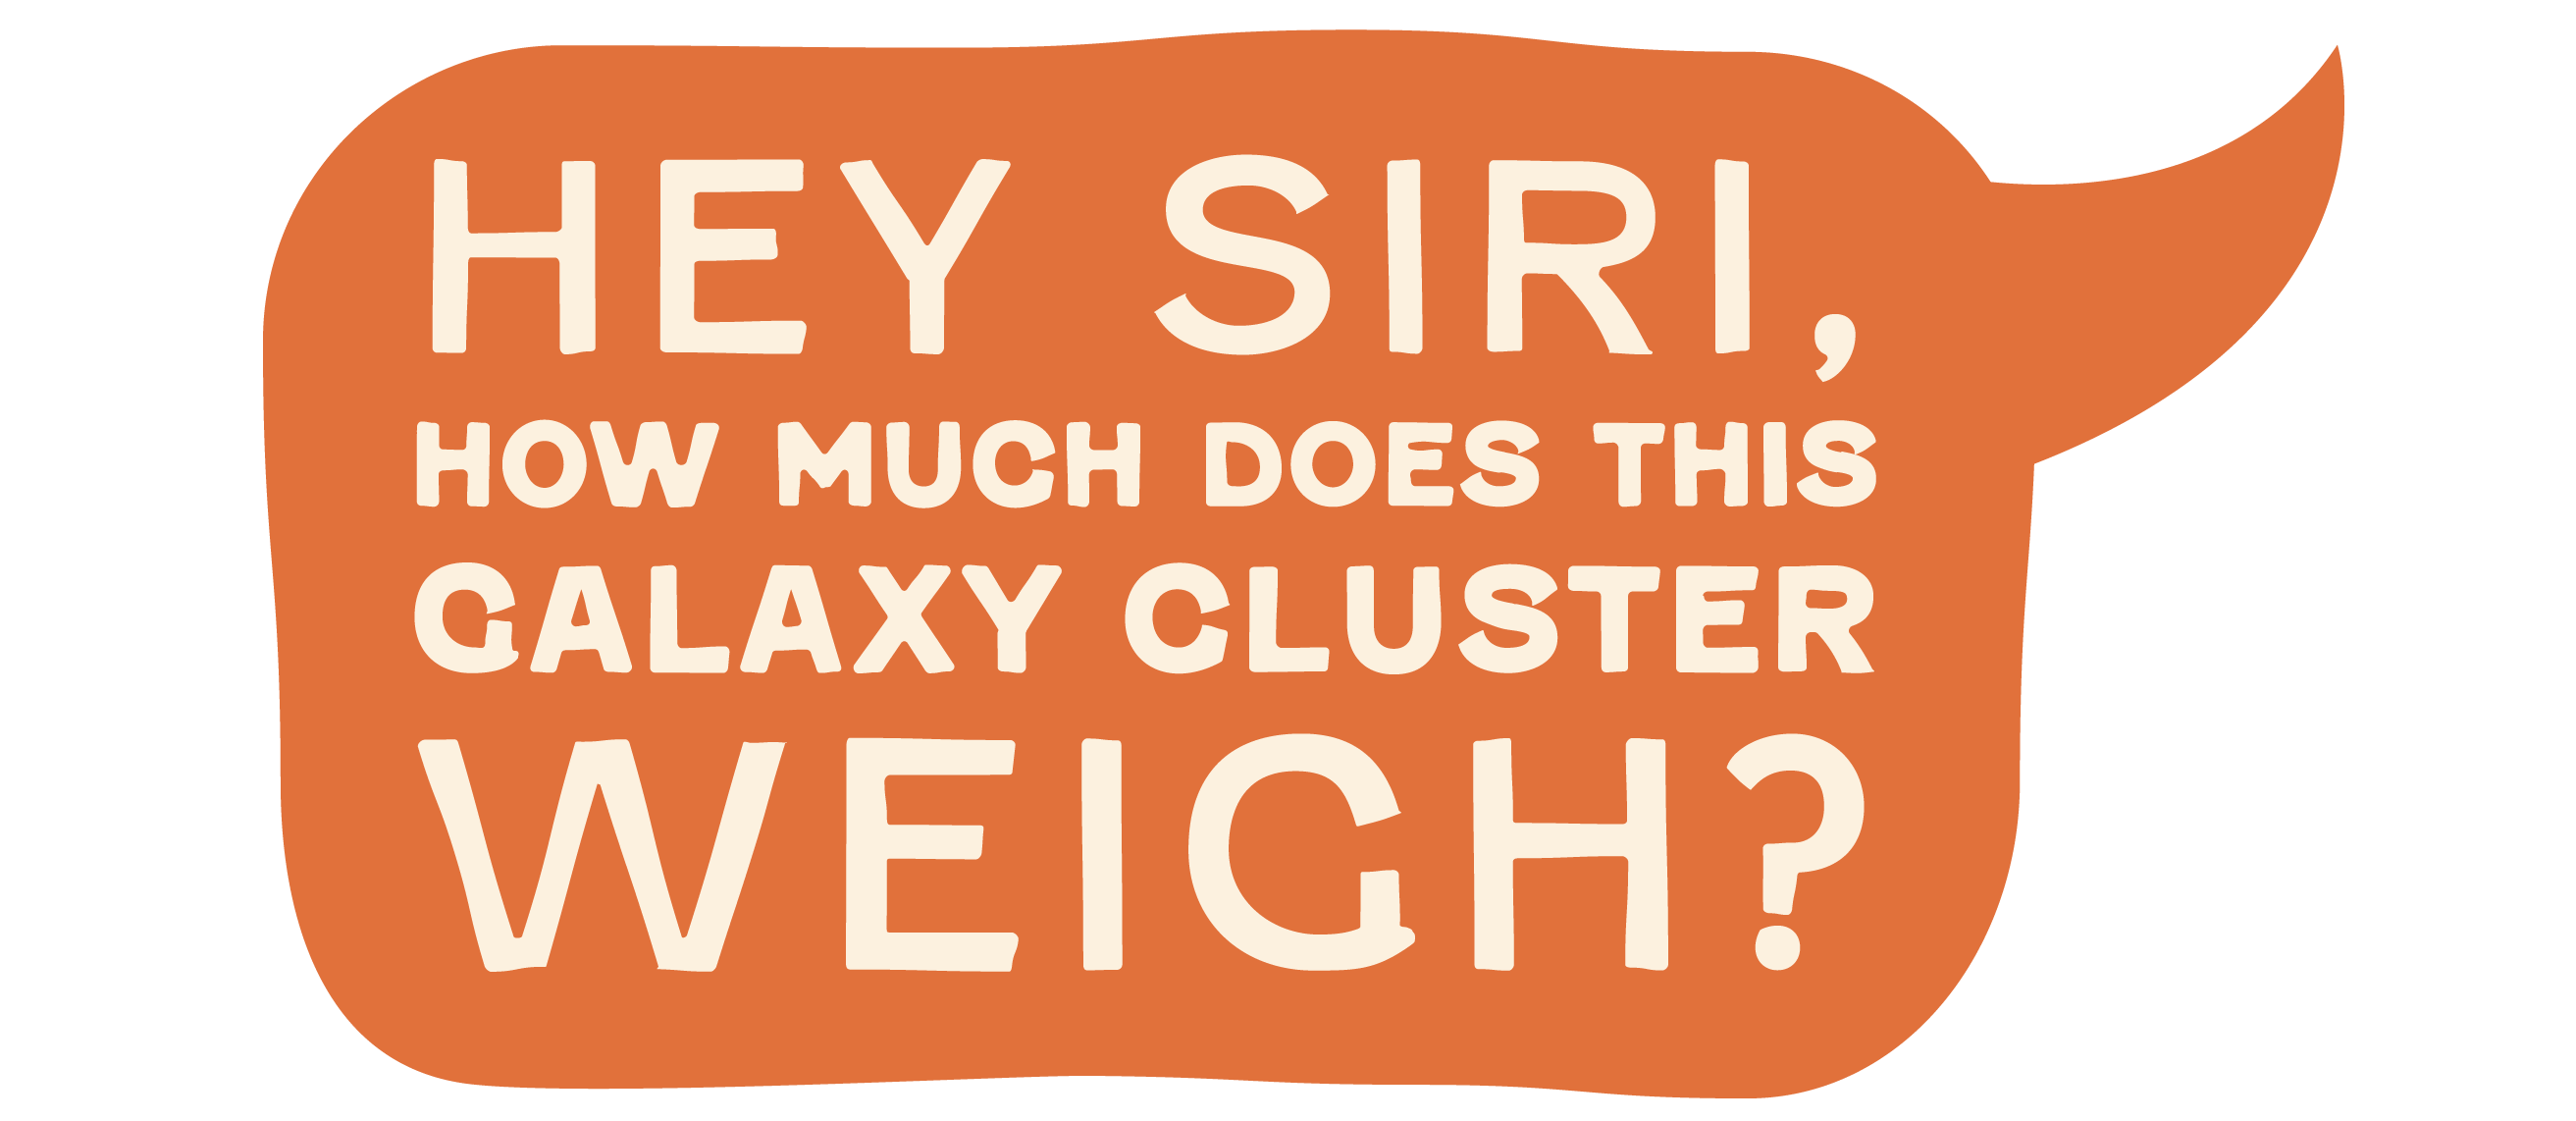 Hey Siri, how much does this galaxy cluster weigh?